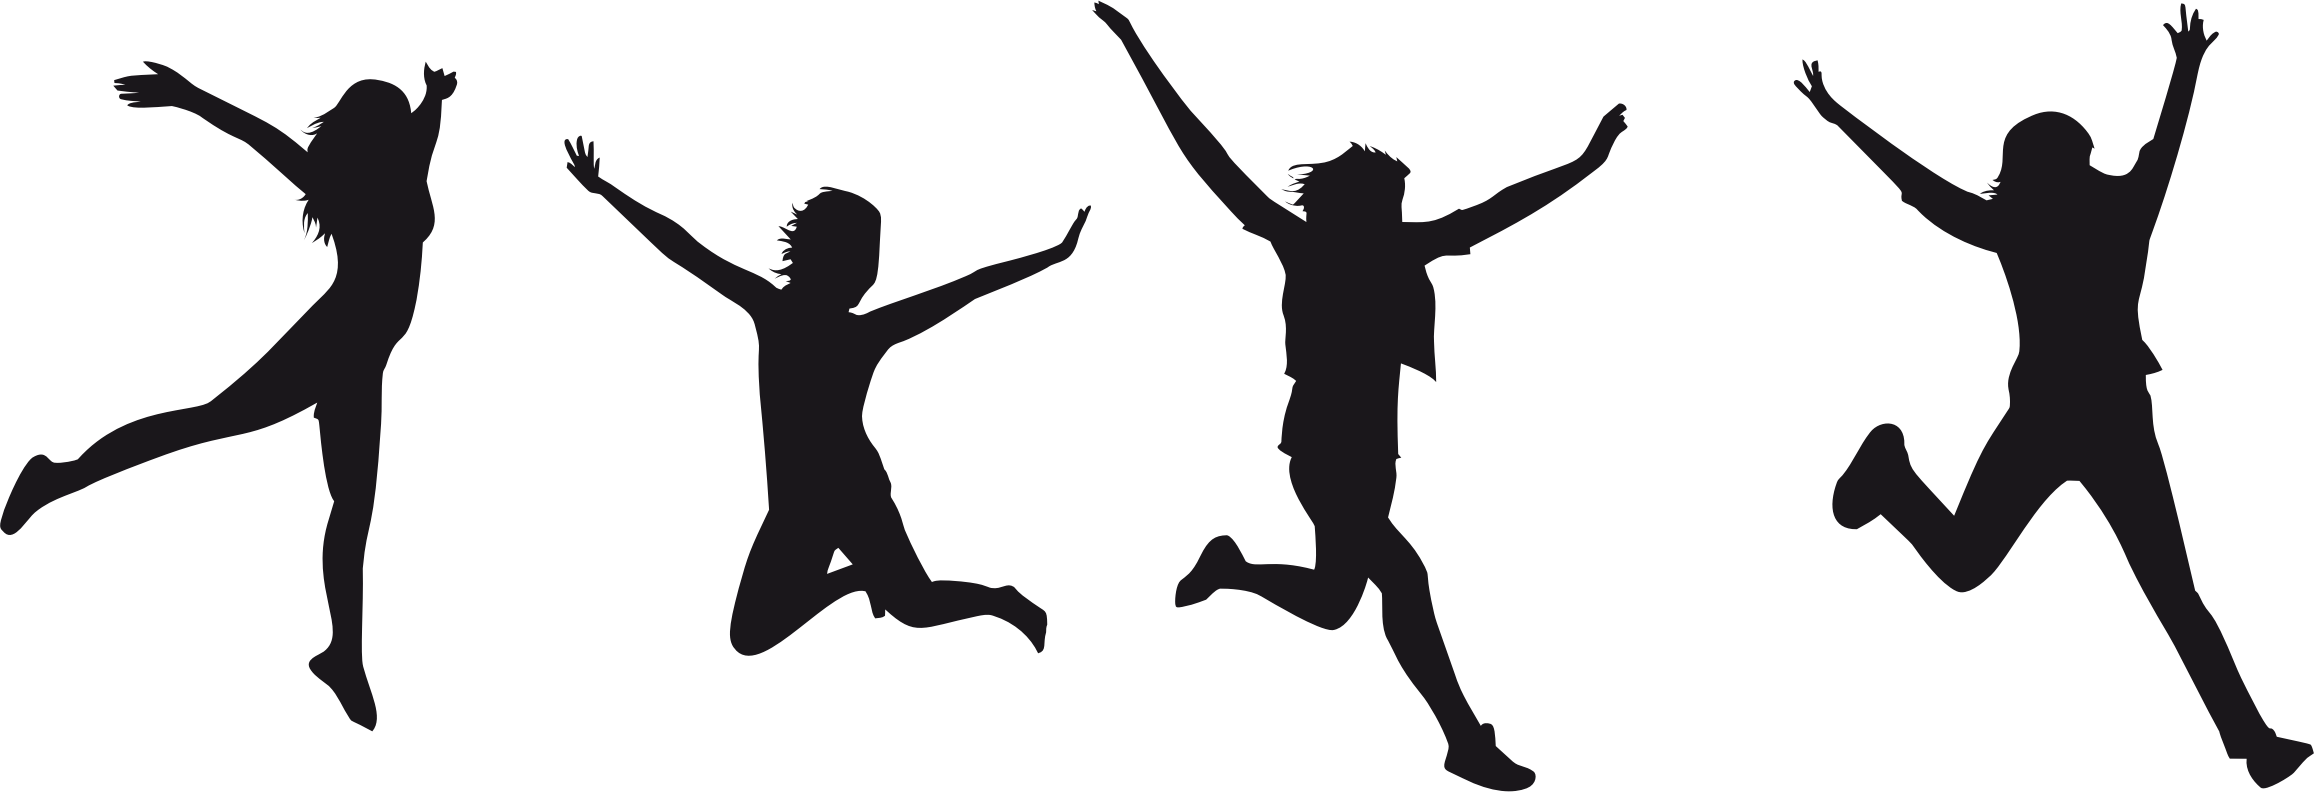 silhouettes of people jumping
